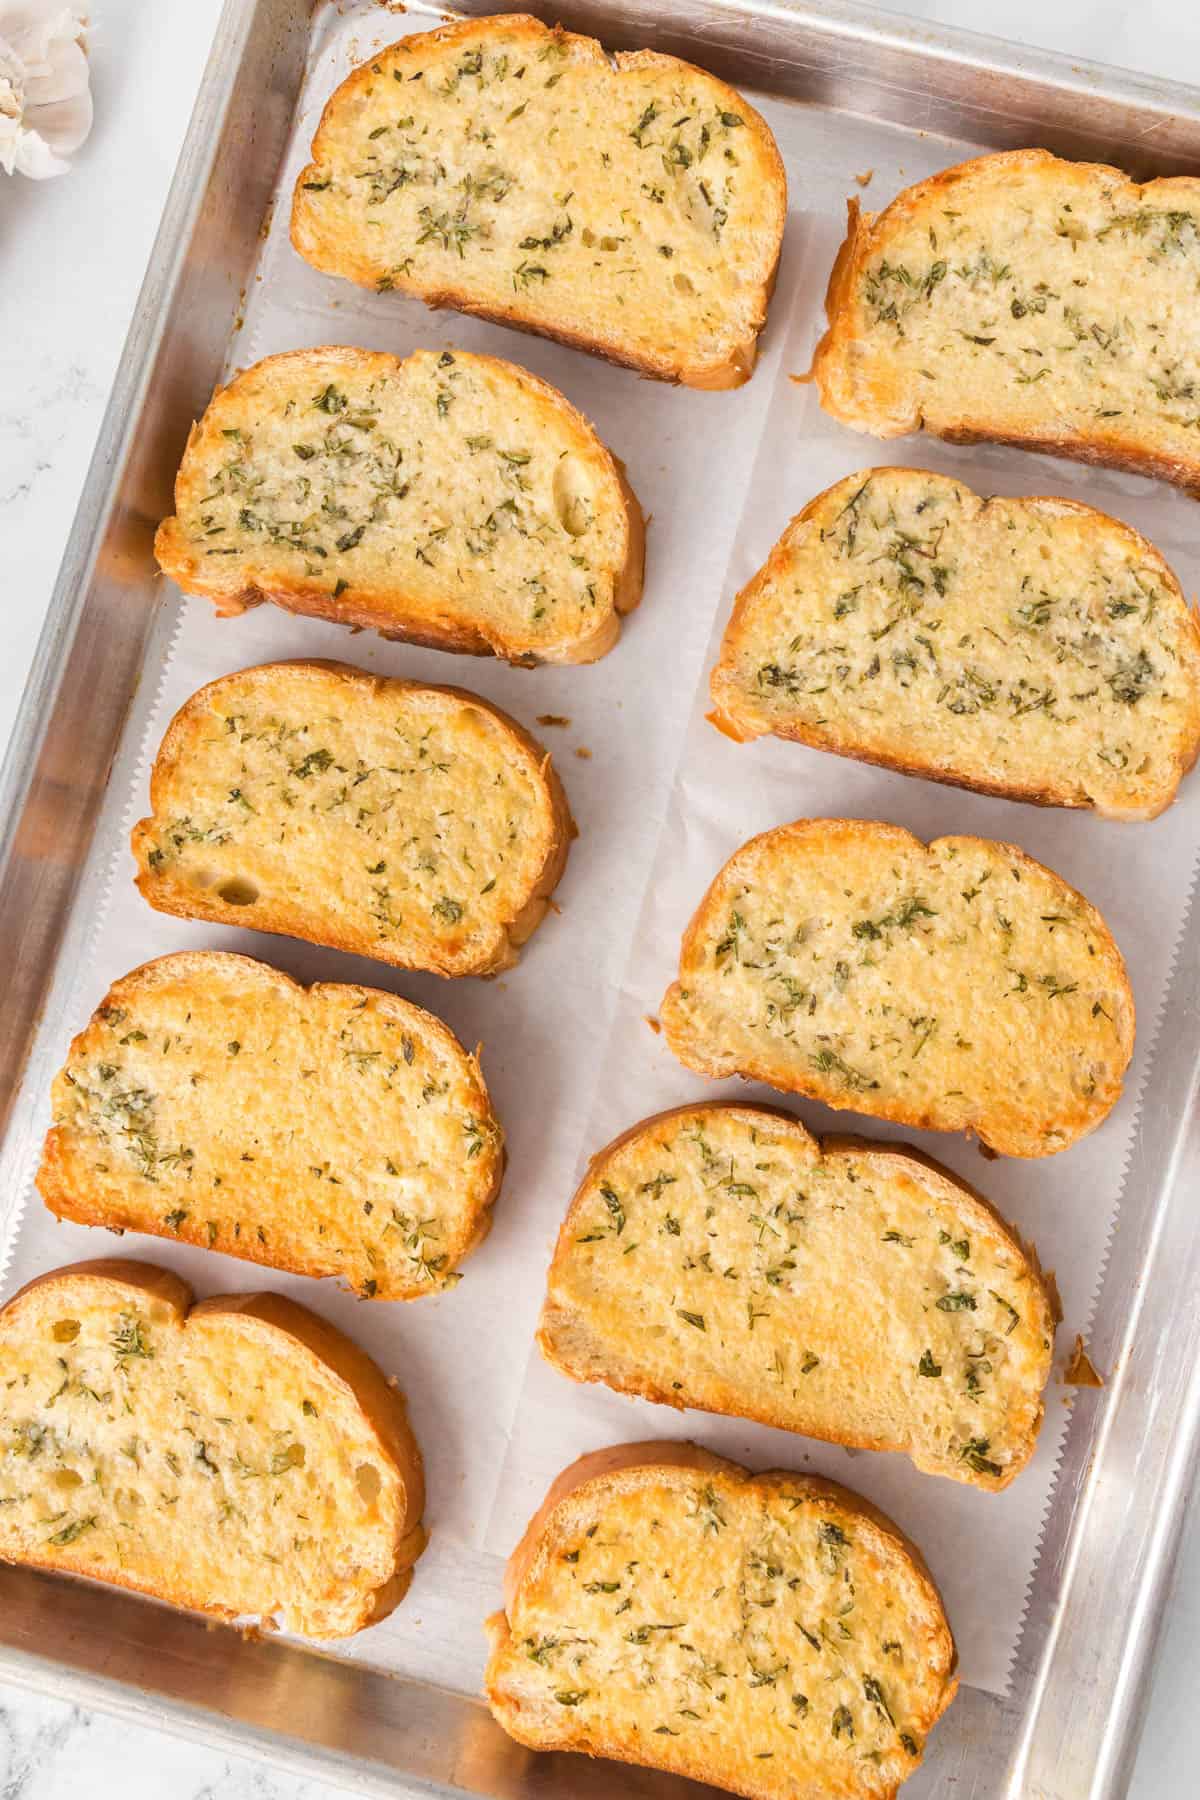 Pieces of homemade garlic bread in rows on a baking sheet.